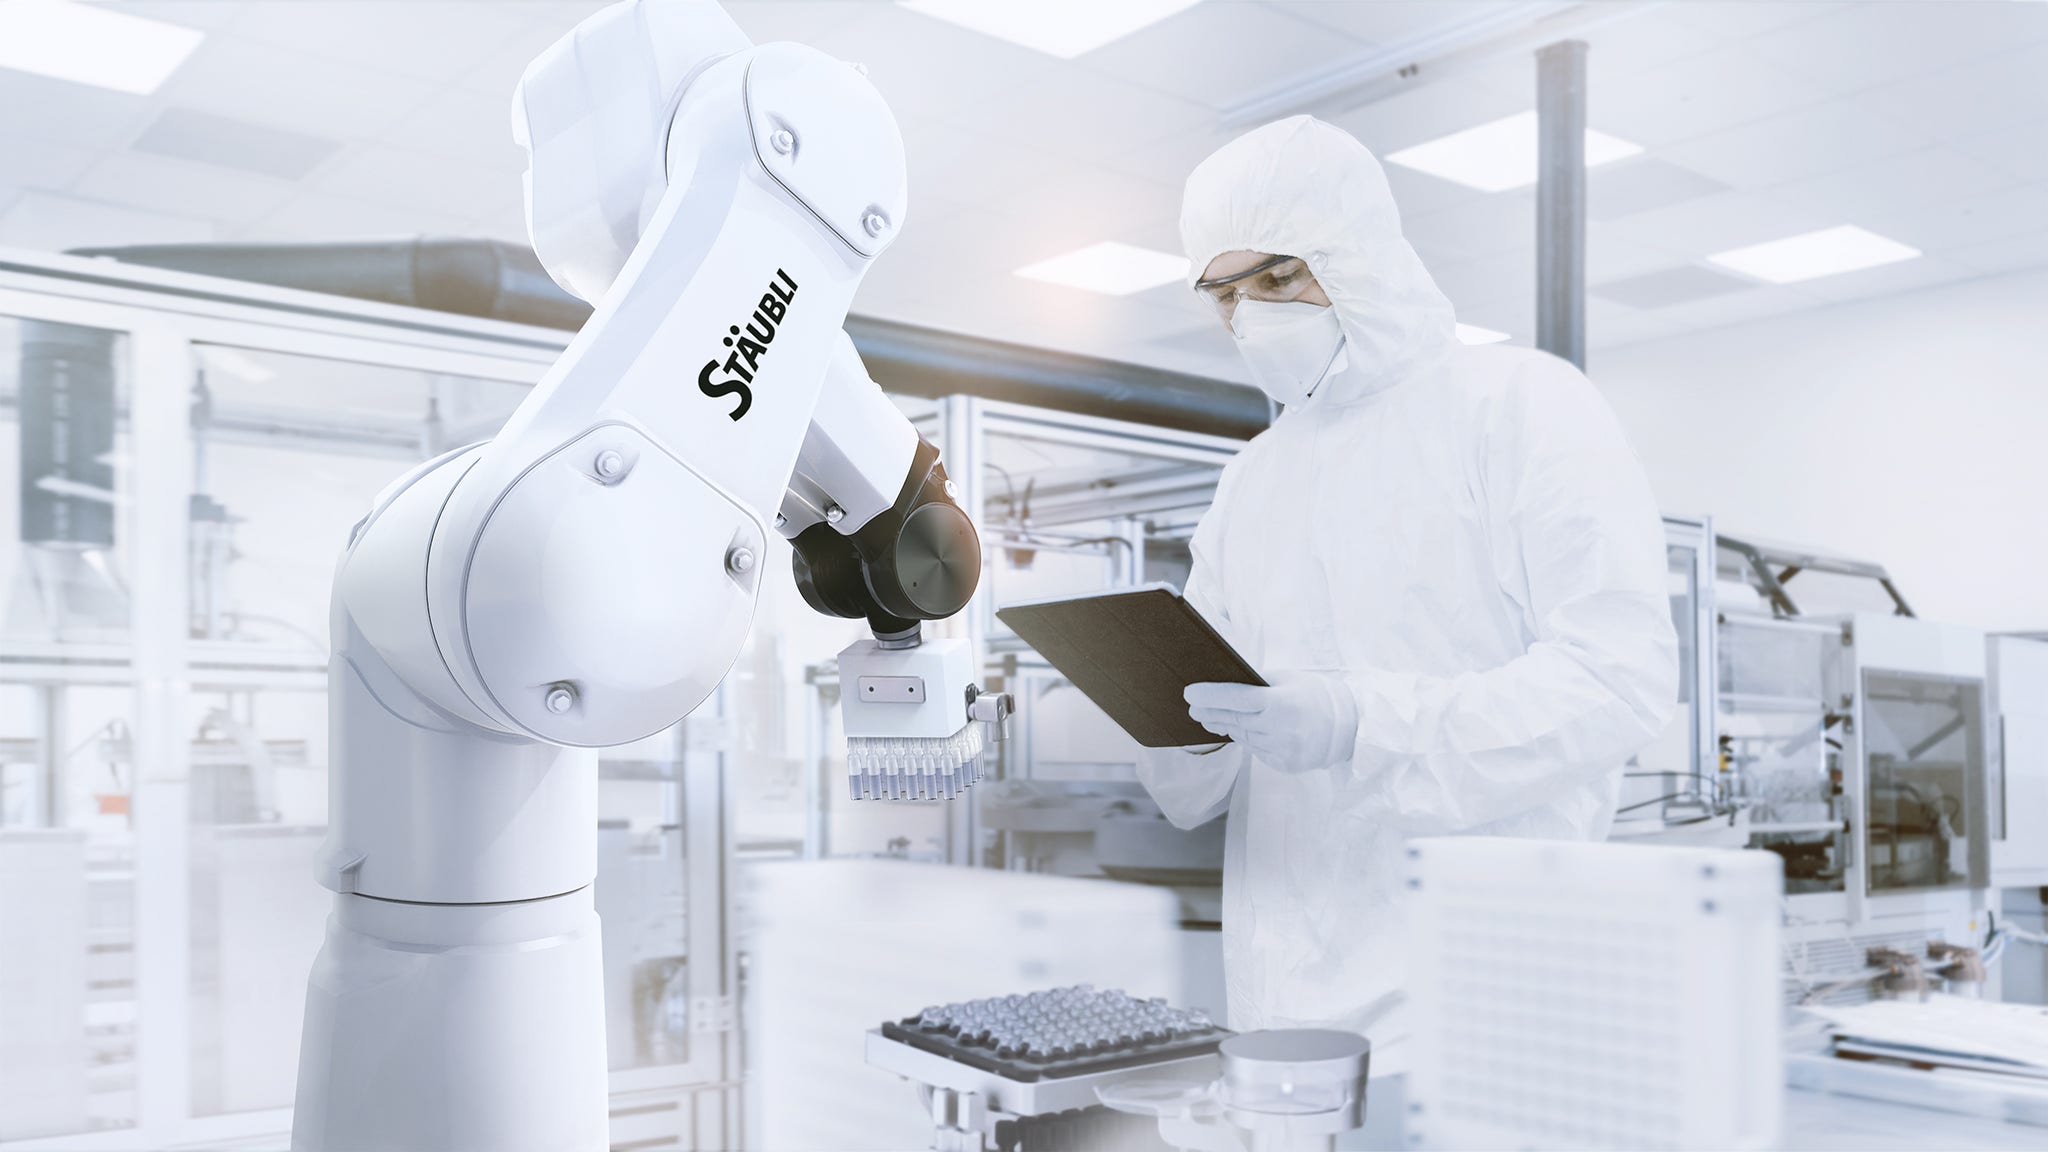 Industrial robot Stericlean operates in a pharmaceutical environment. Quality Control Check: Scientist Using Digital Tablet Computer and wearing Protective Suit walks through Manufacturing Laboratory. Product Manufacturing: Pharmaceutics, Biotechnology.